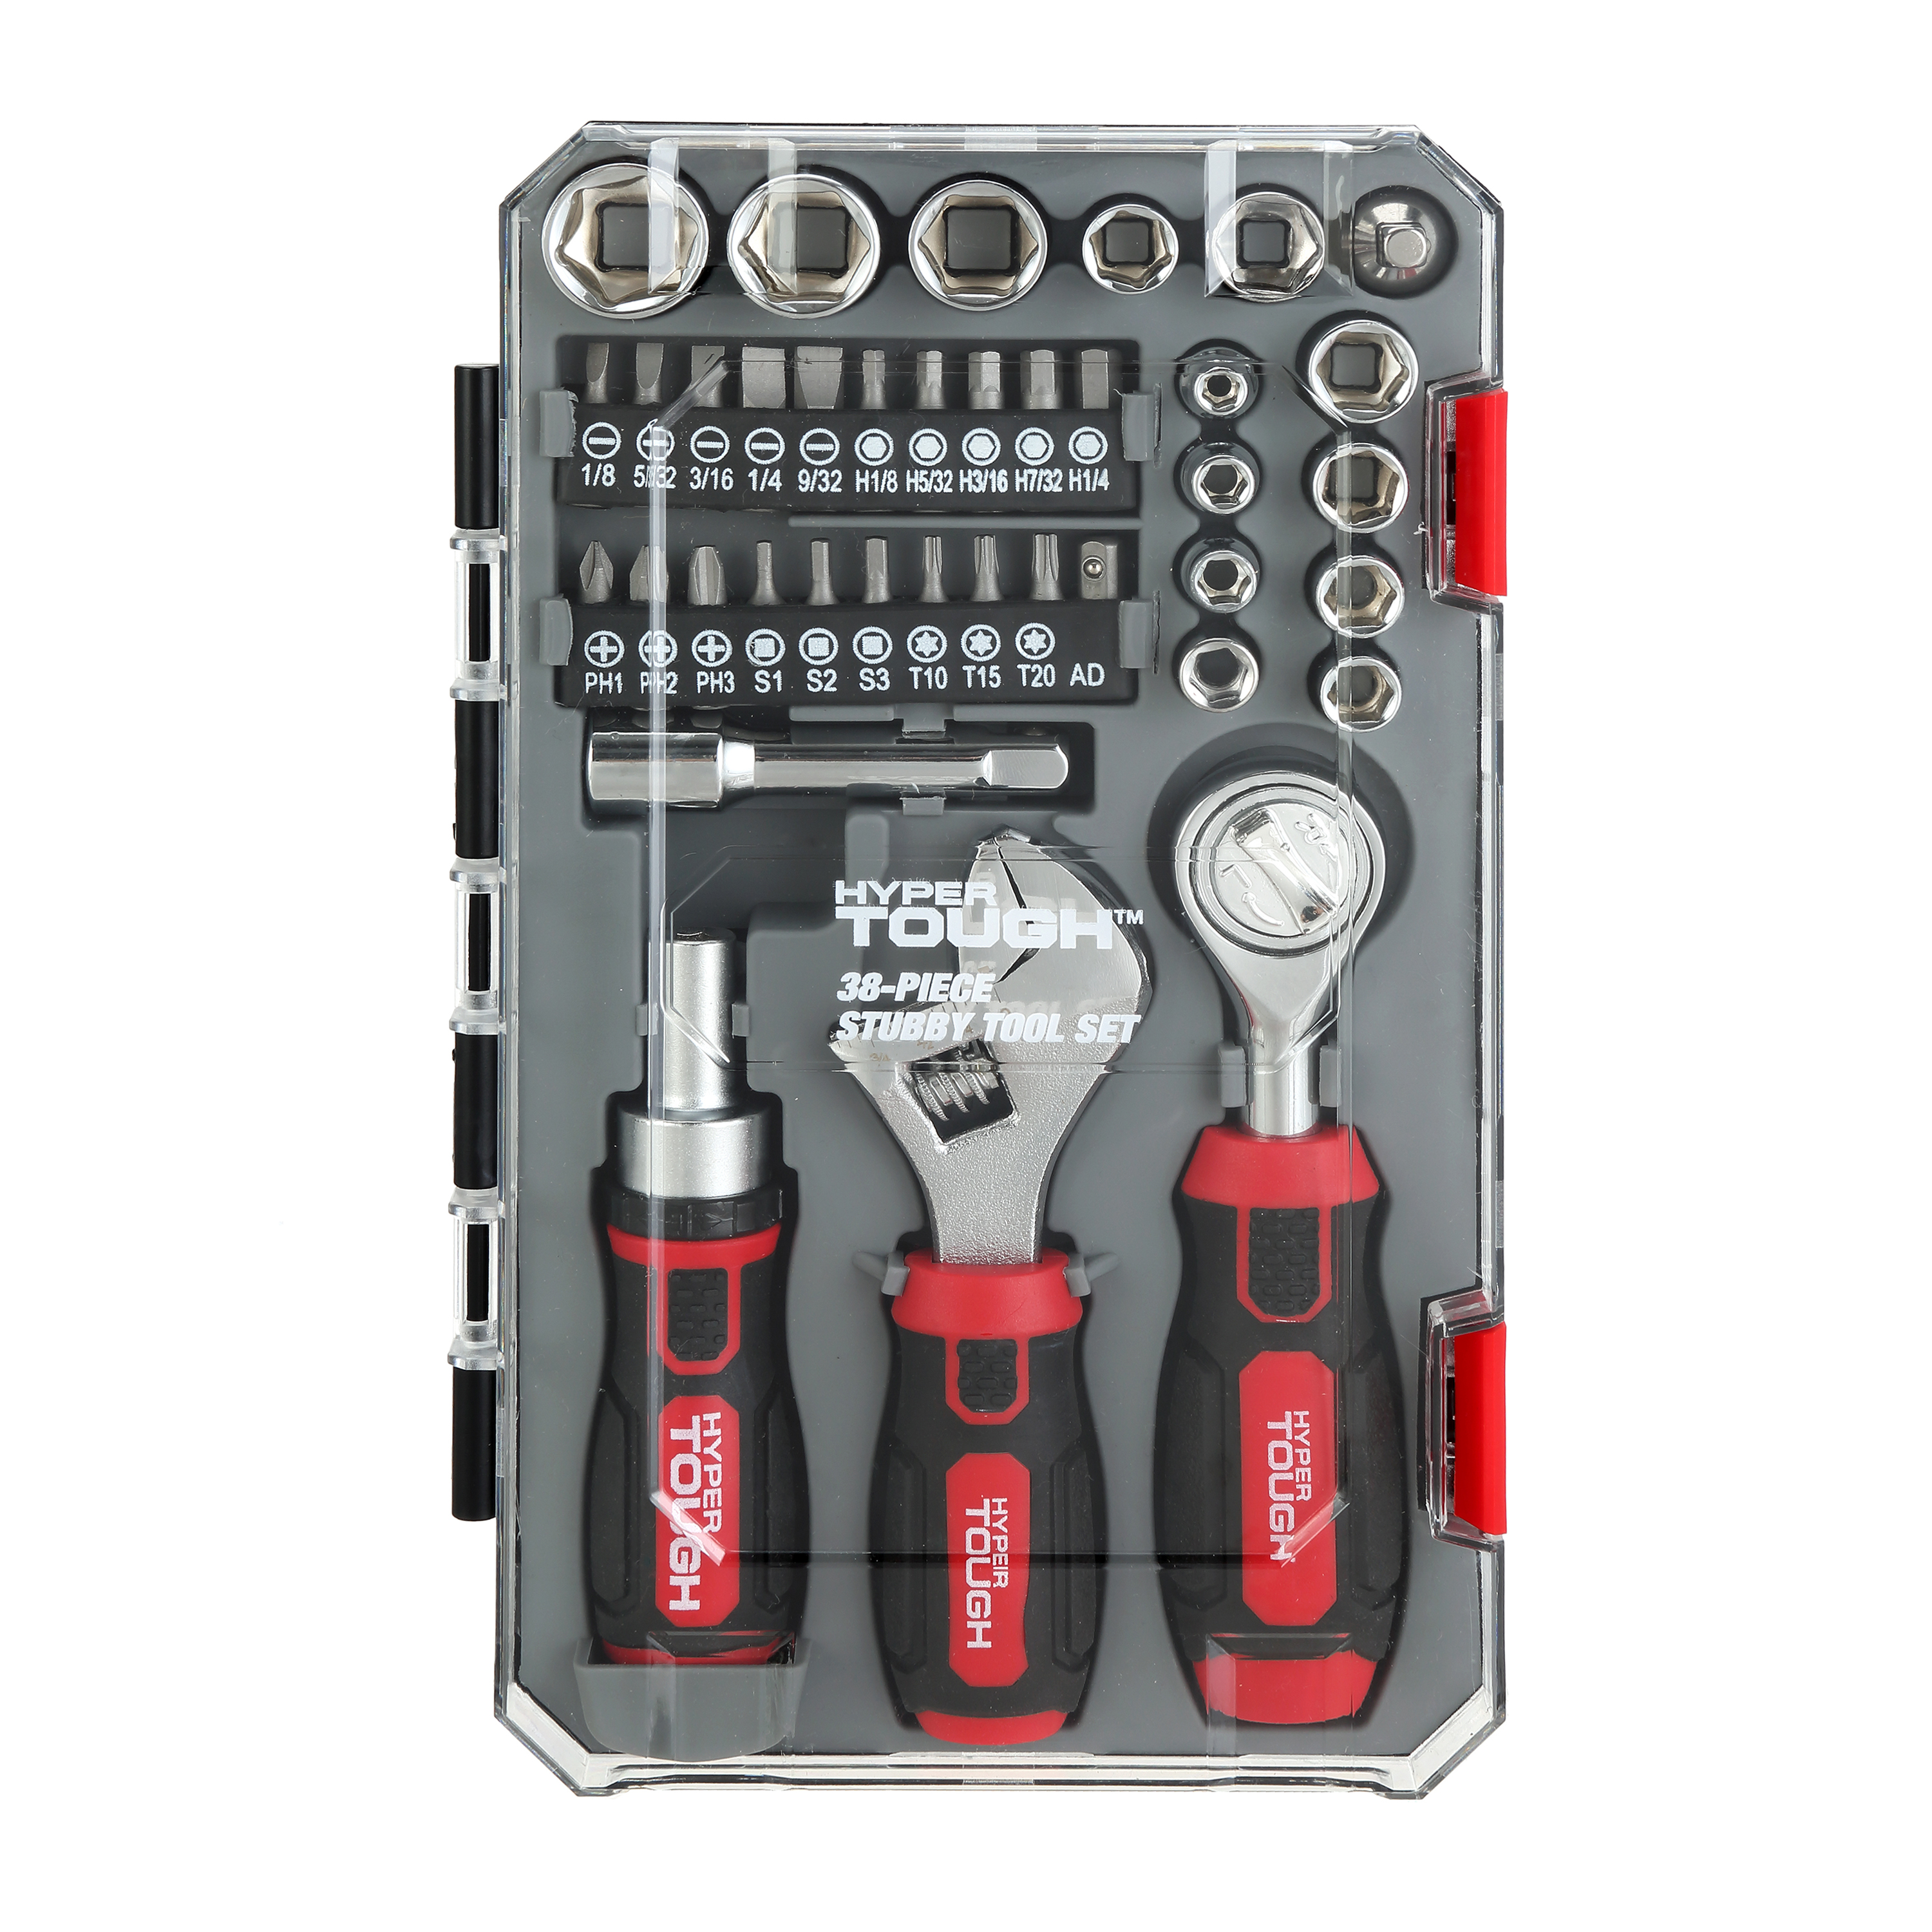 Hyper Tough 38 Piece Multi-Size Stubby Wrench and Socket Set For Home Use - image 2 of 13